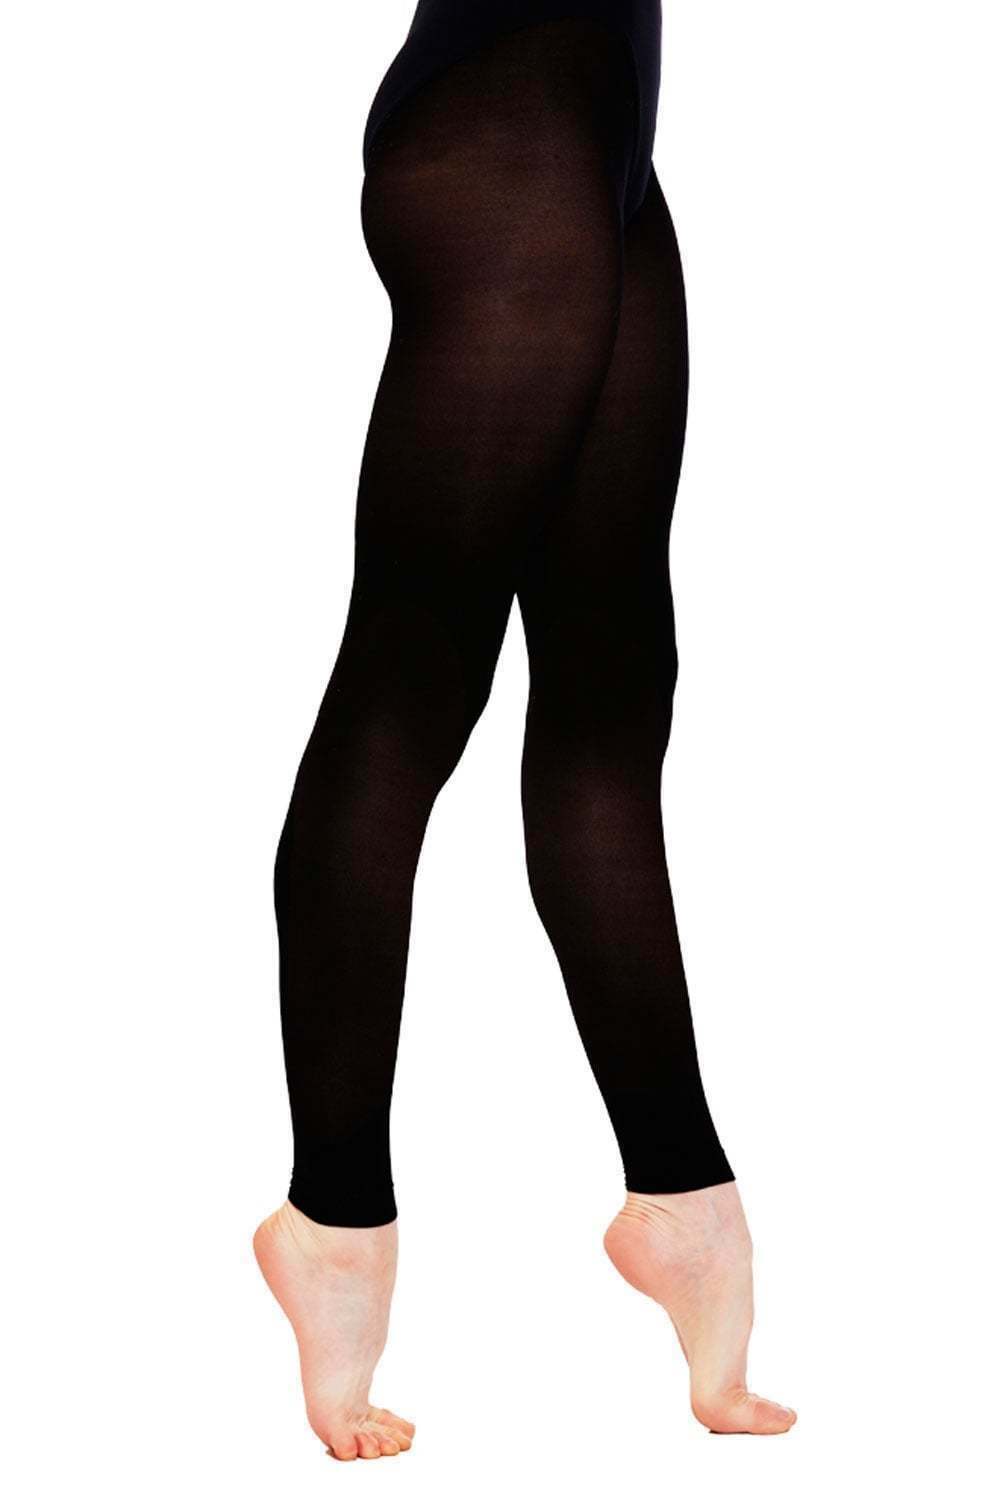 LADIES ADULT SILKY FOOTLESS DANCE TIGHTS IN BLACK - Hamtons Direct